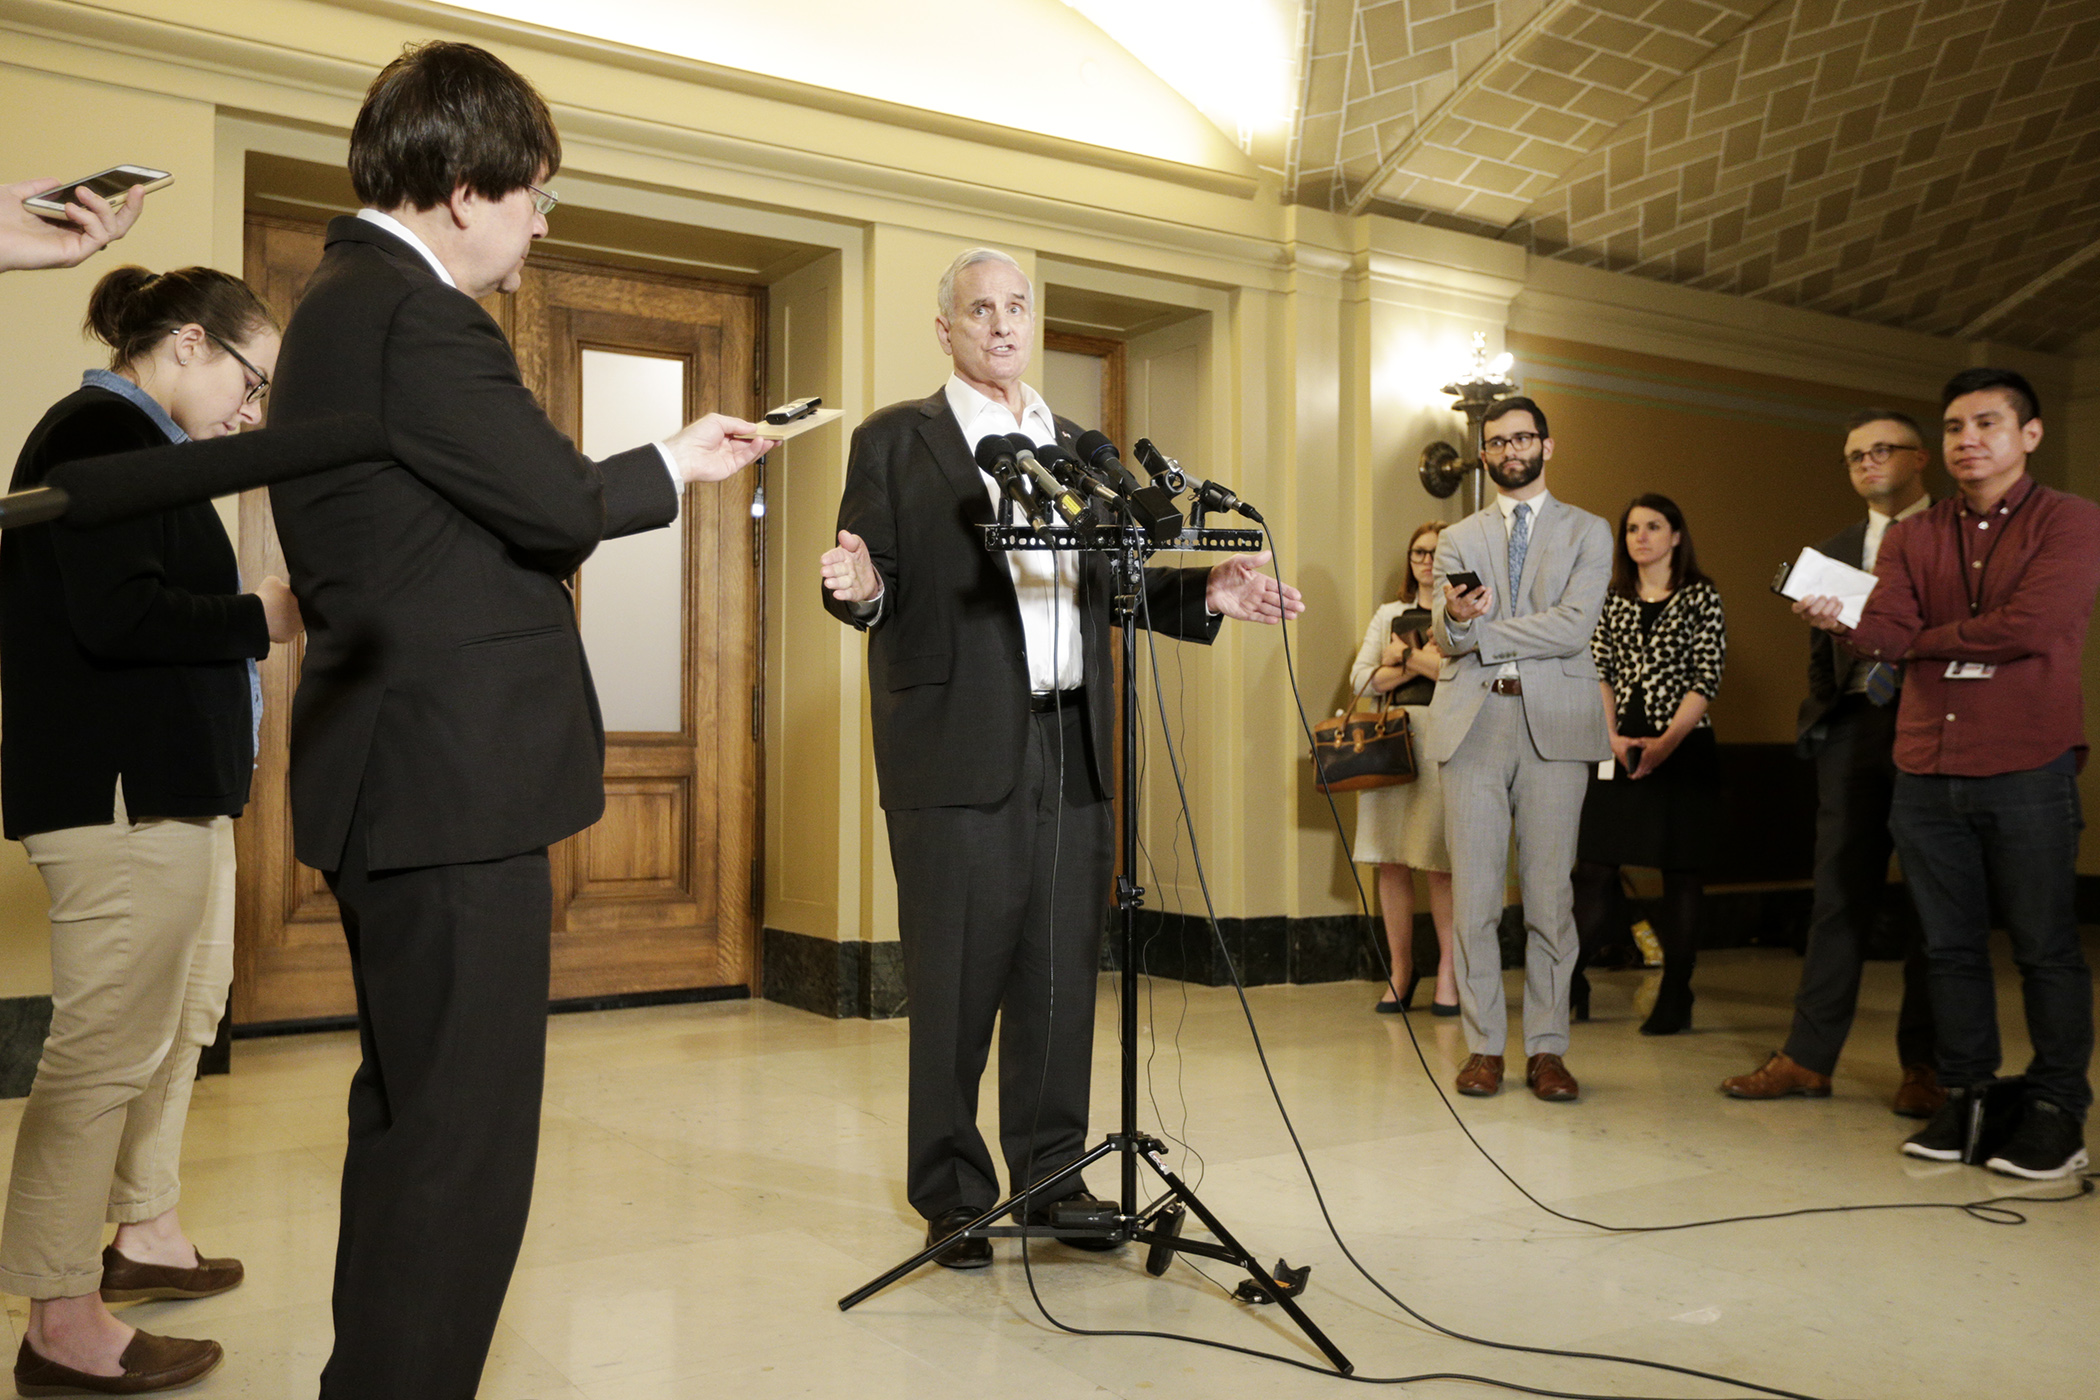 Gov. Mark Dayton addressed the media May 4 after meeting with legislative leaders to negotiate a budget deal. Photo by Paul Battaglia